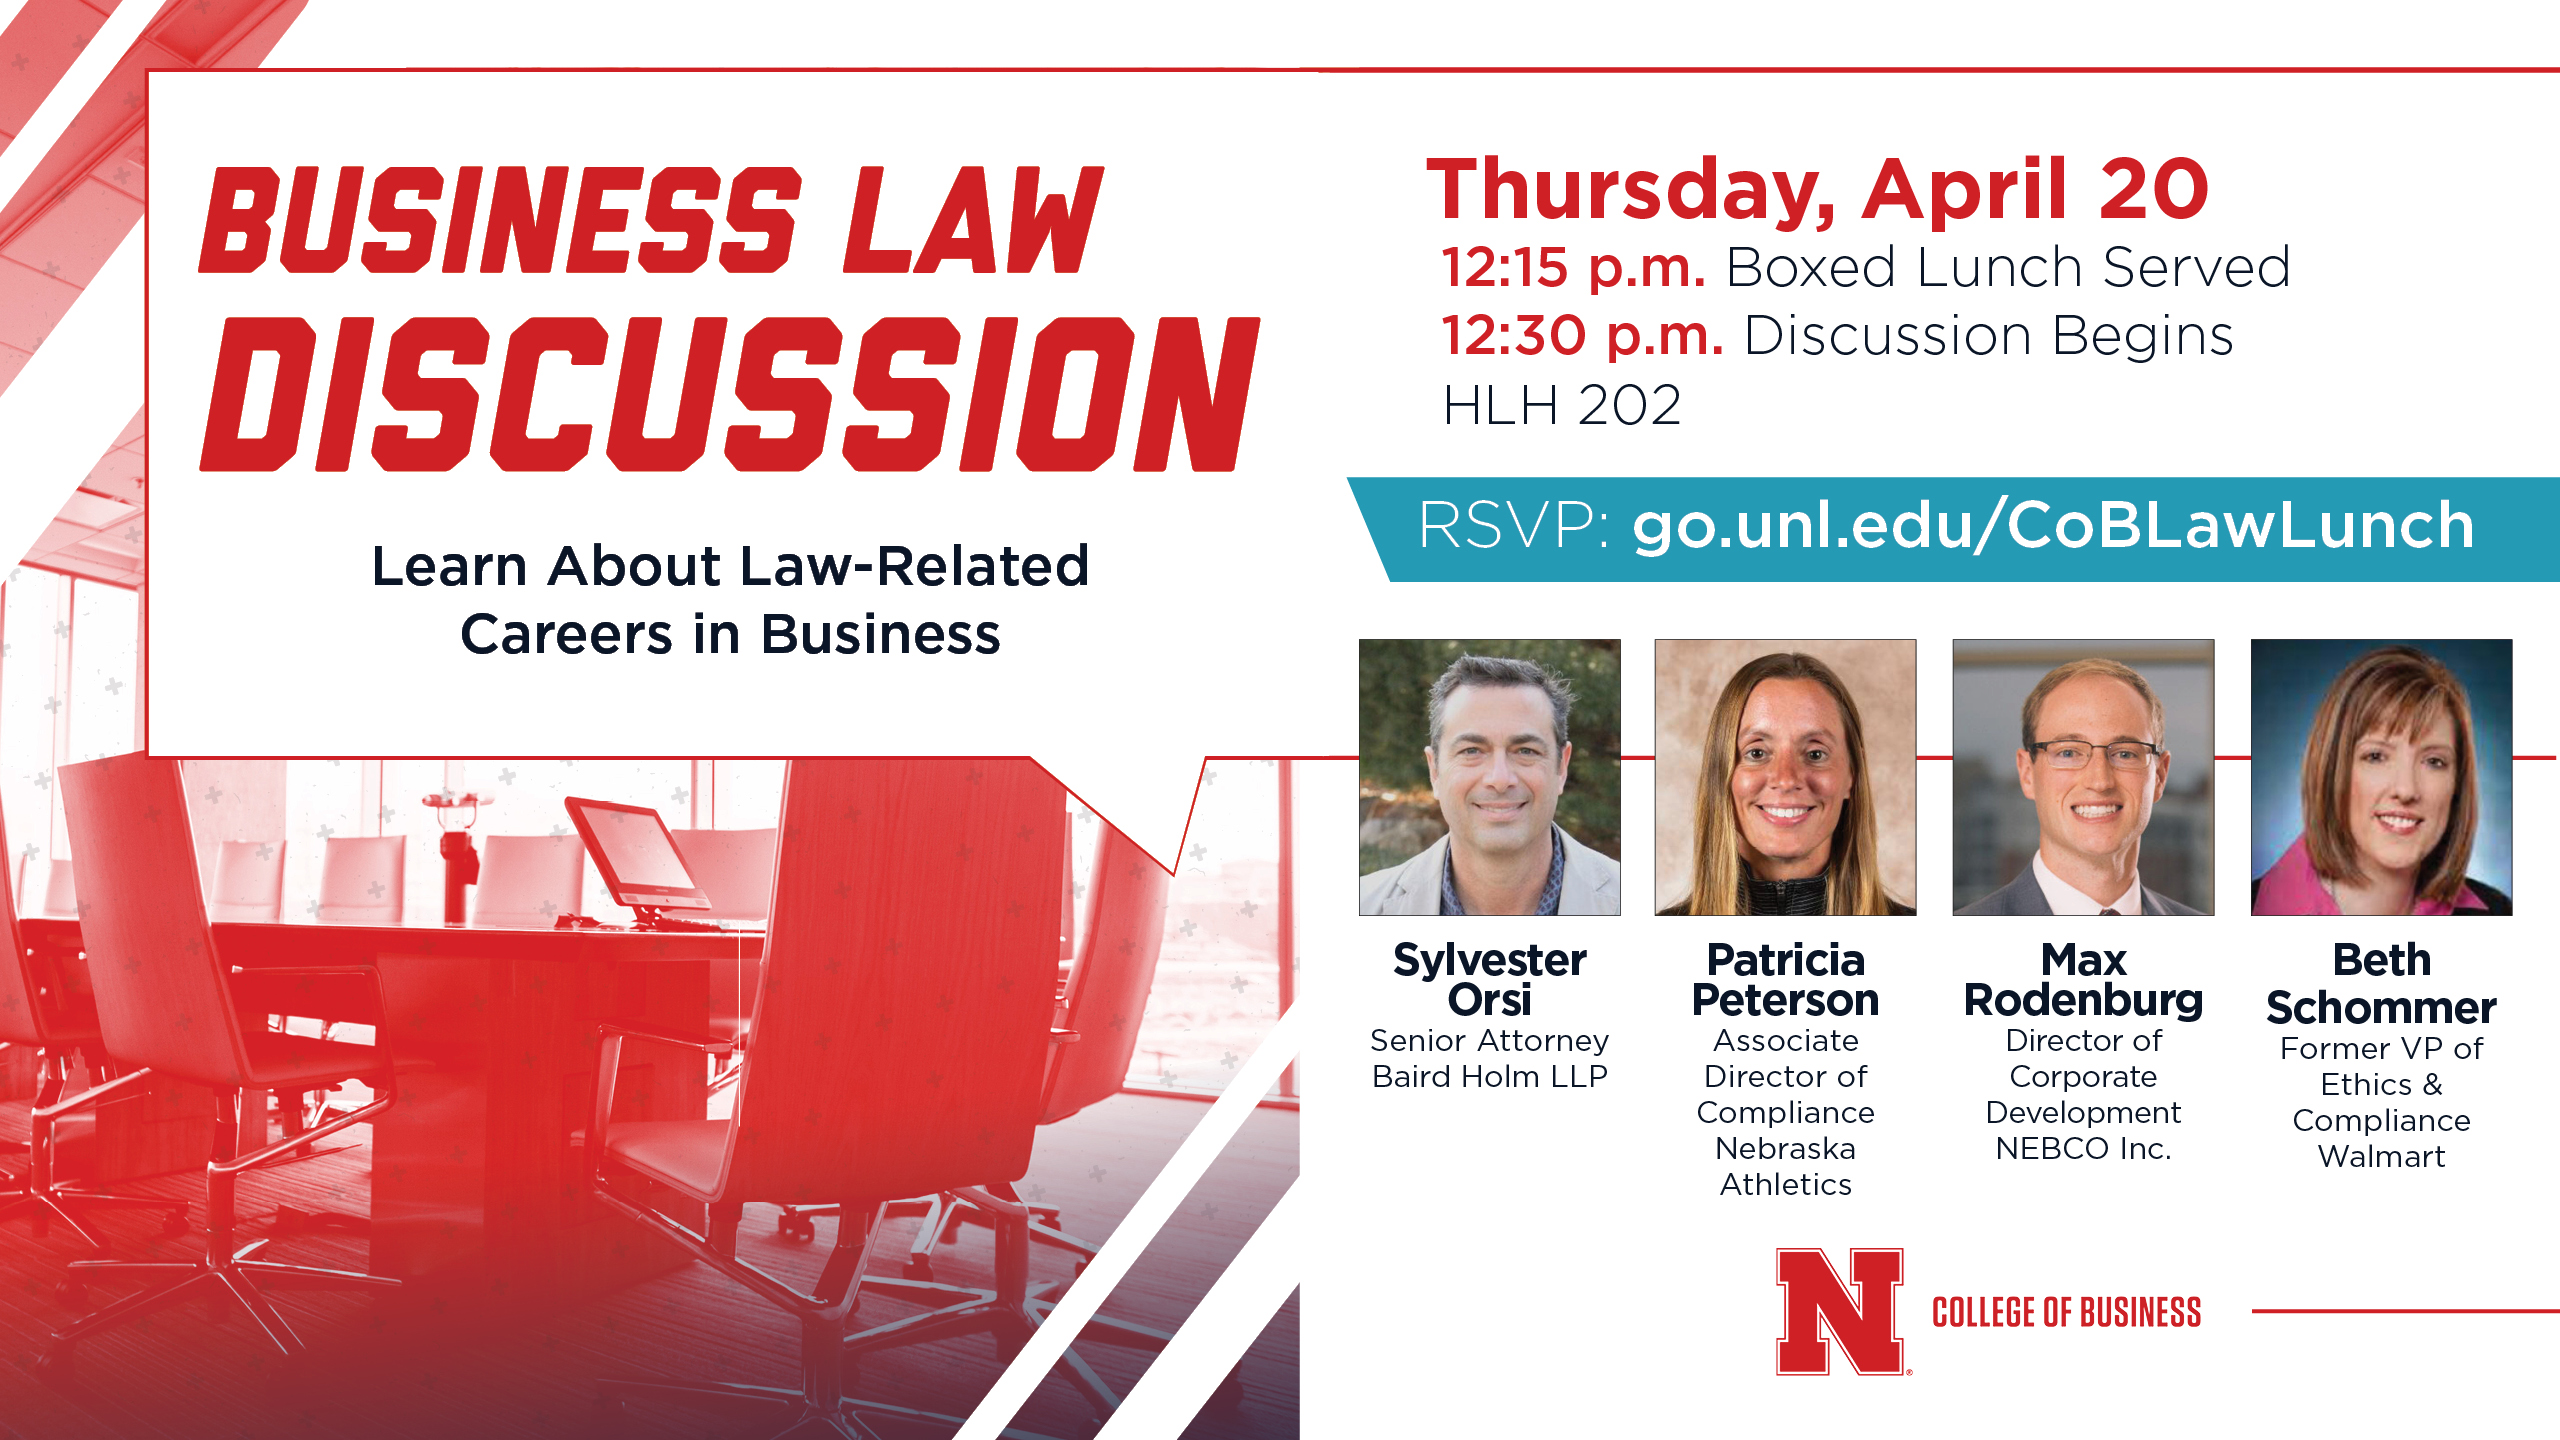 Learn About Business-Related Law Careers on April 20 